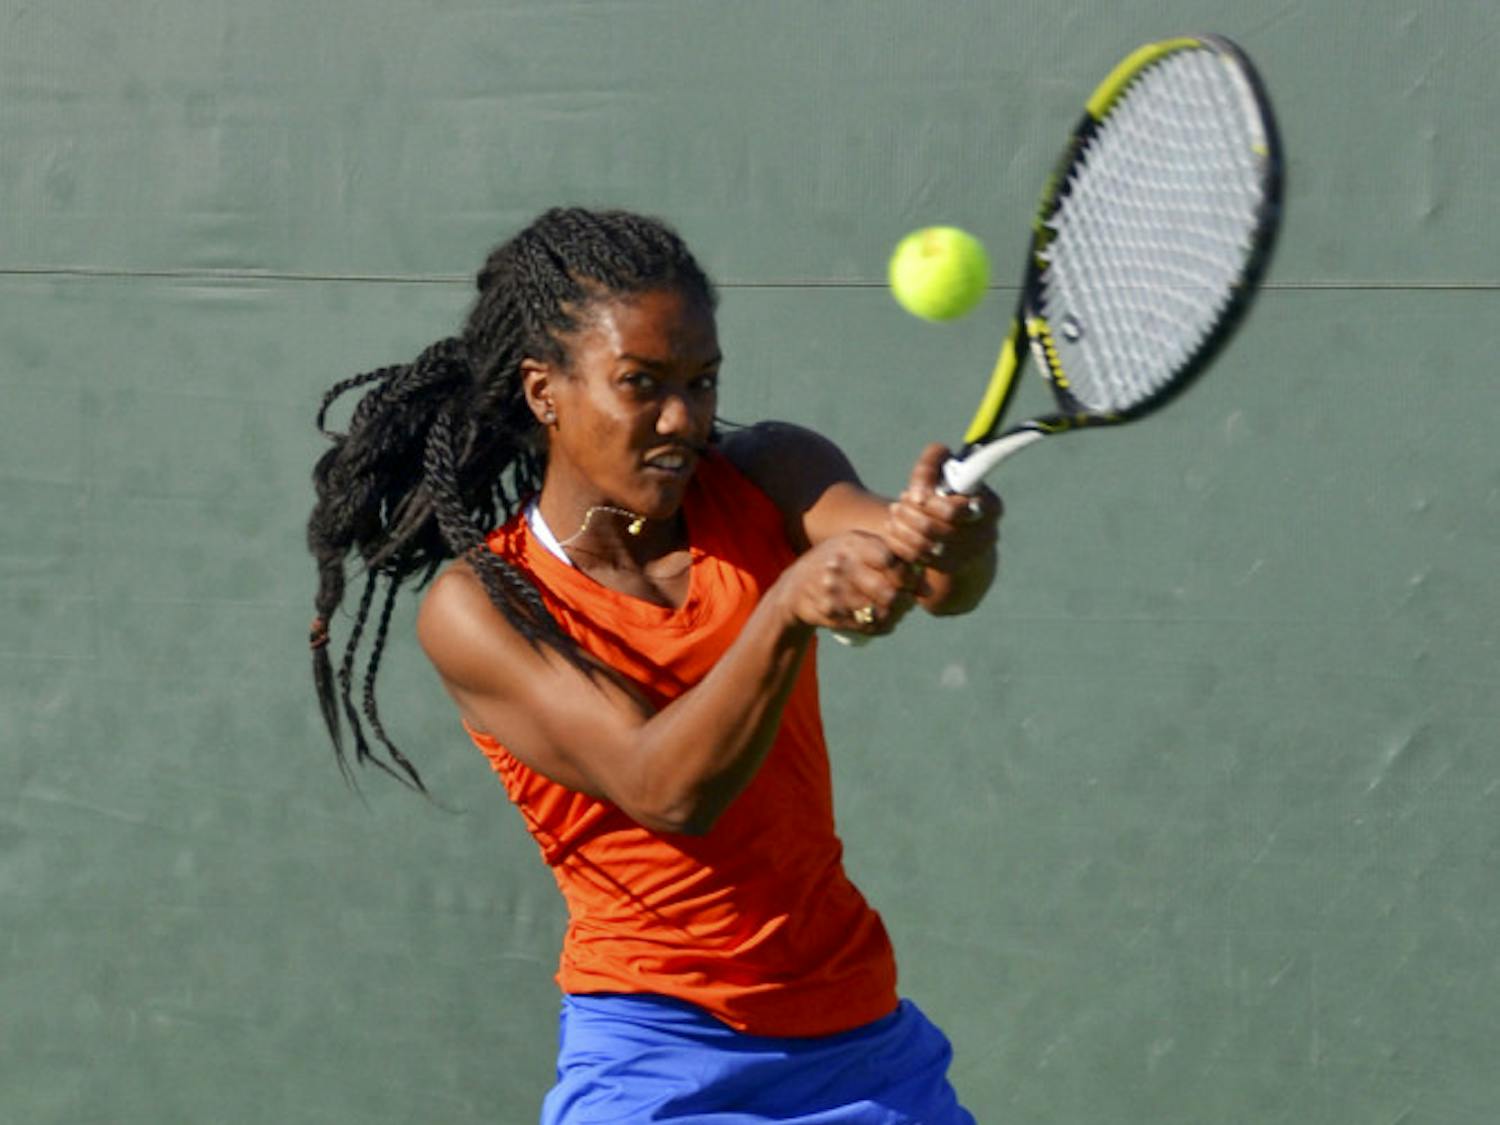 Brianna Morgan hits a two-handed backhand during Florida's 4-0 win against Elon on Saturday at the Ring Tennis Complex.